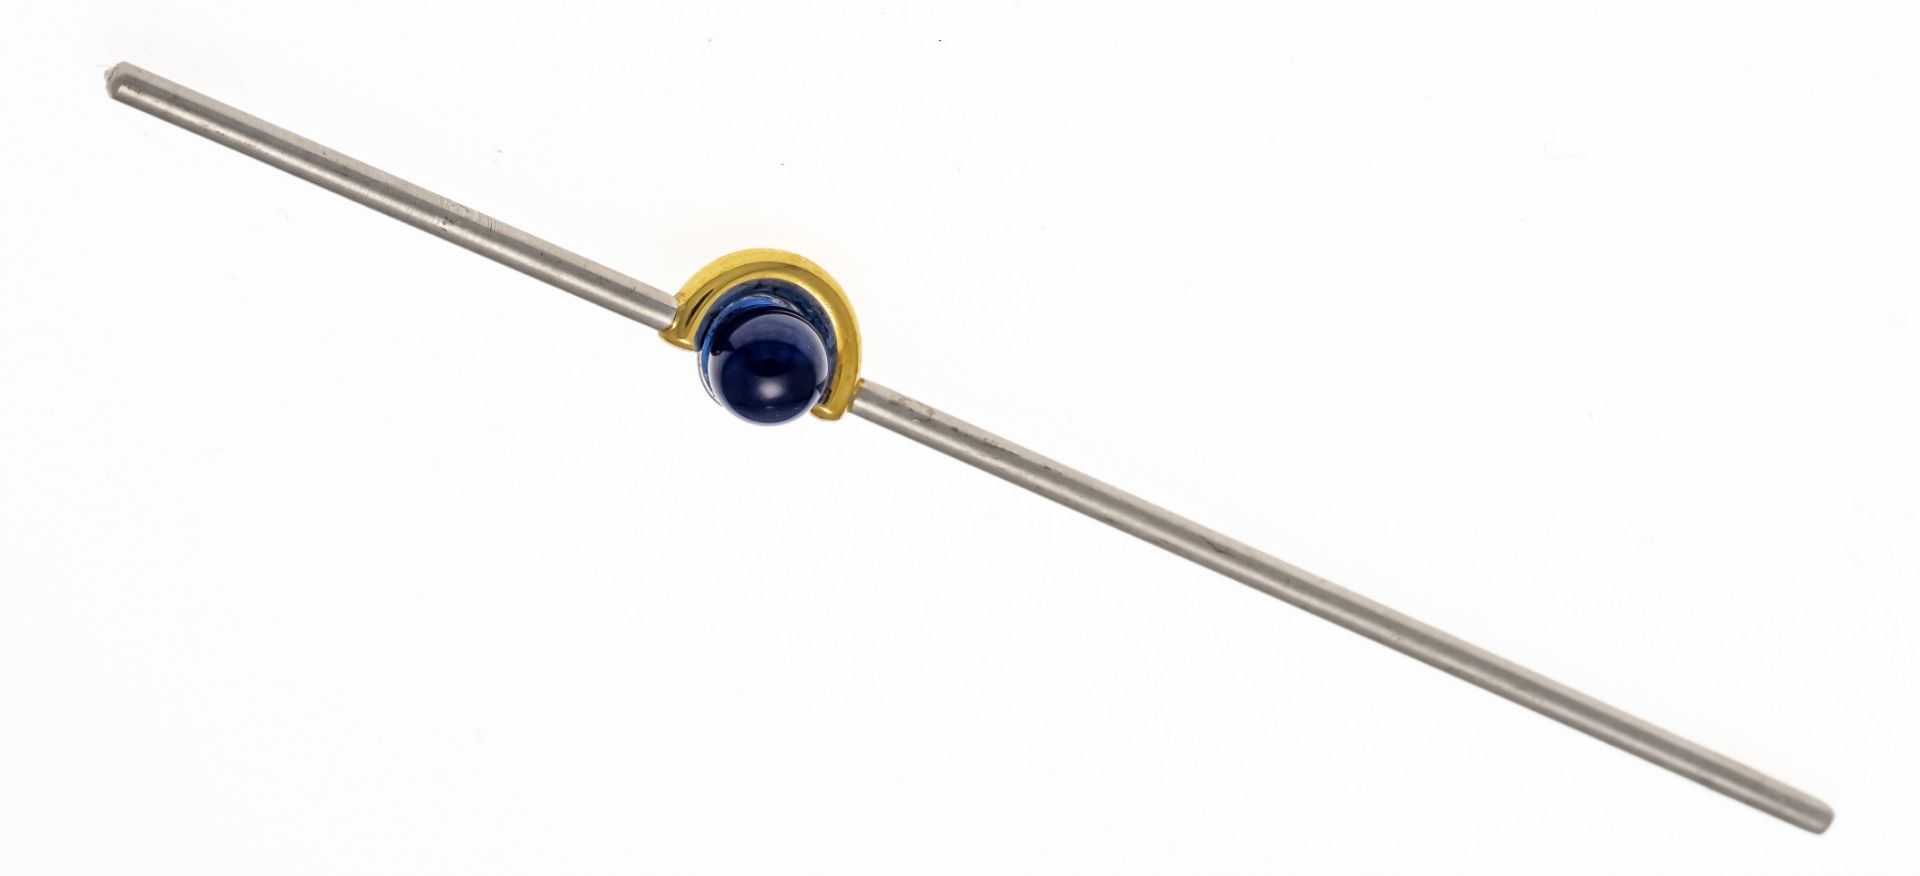 Design pendant platinum 950/000 partially gold-plated, in the form of a bar with a blue gemstone